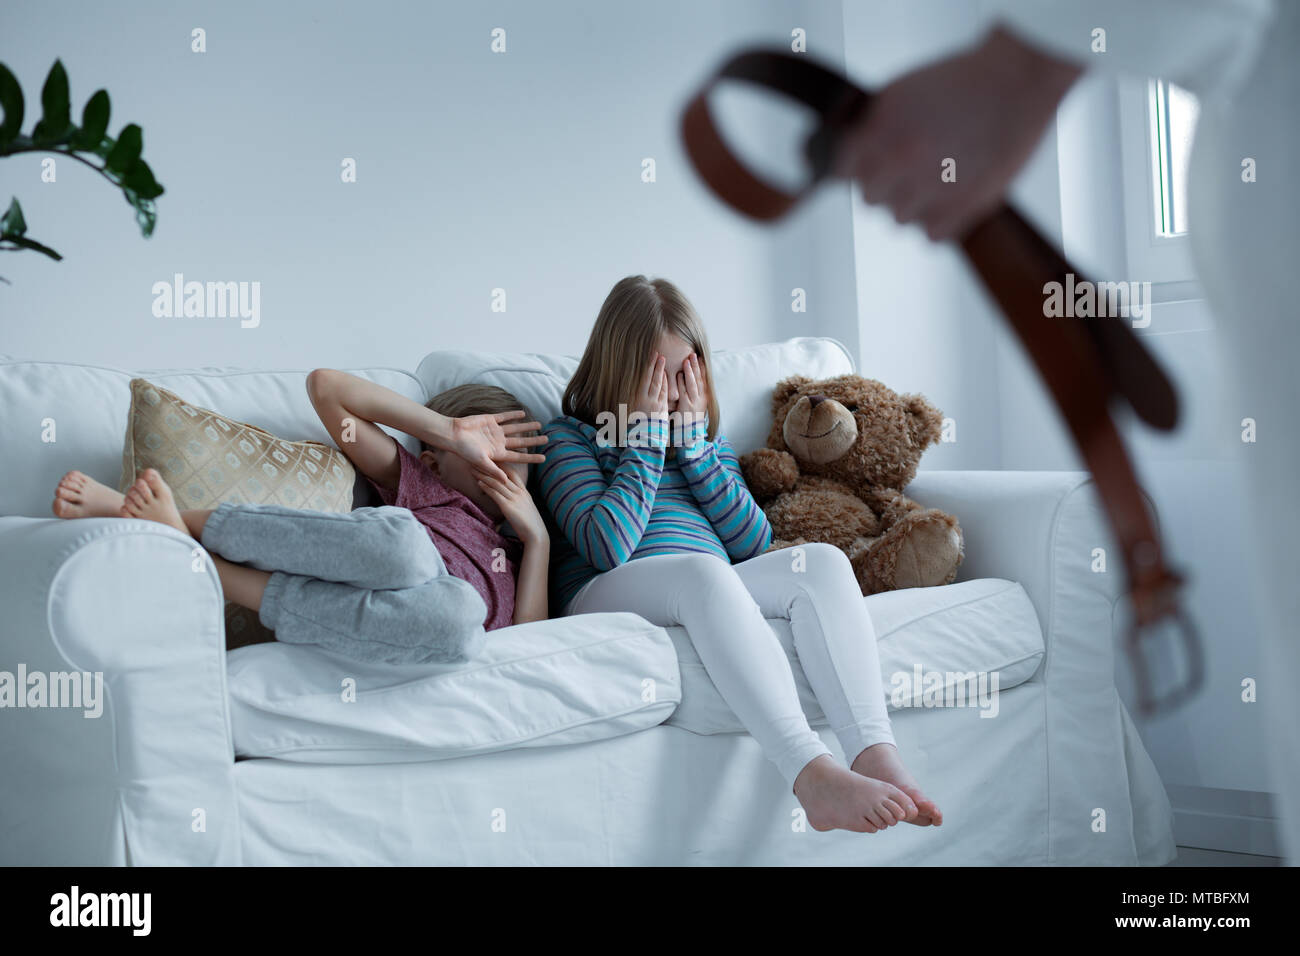 Children being unsafe in their own home Stock Photo